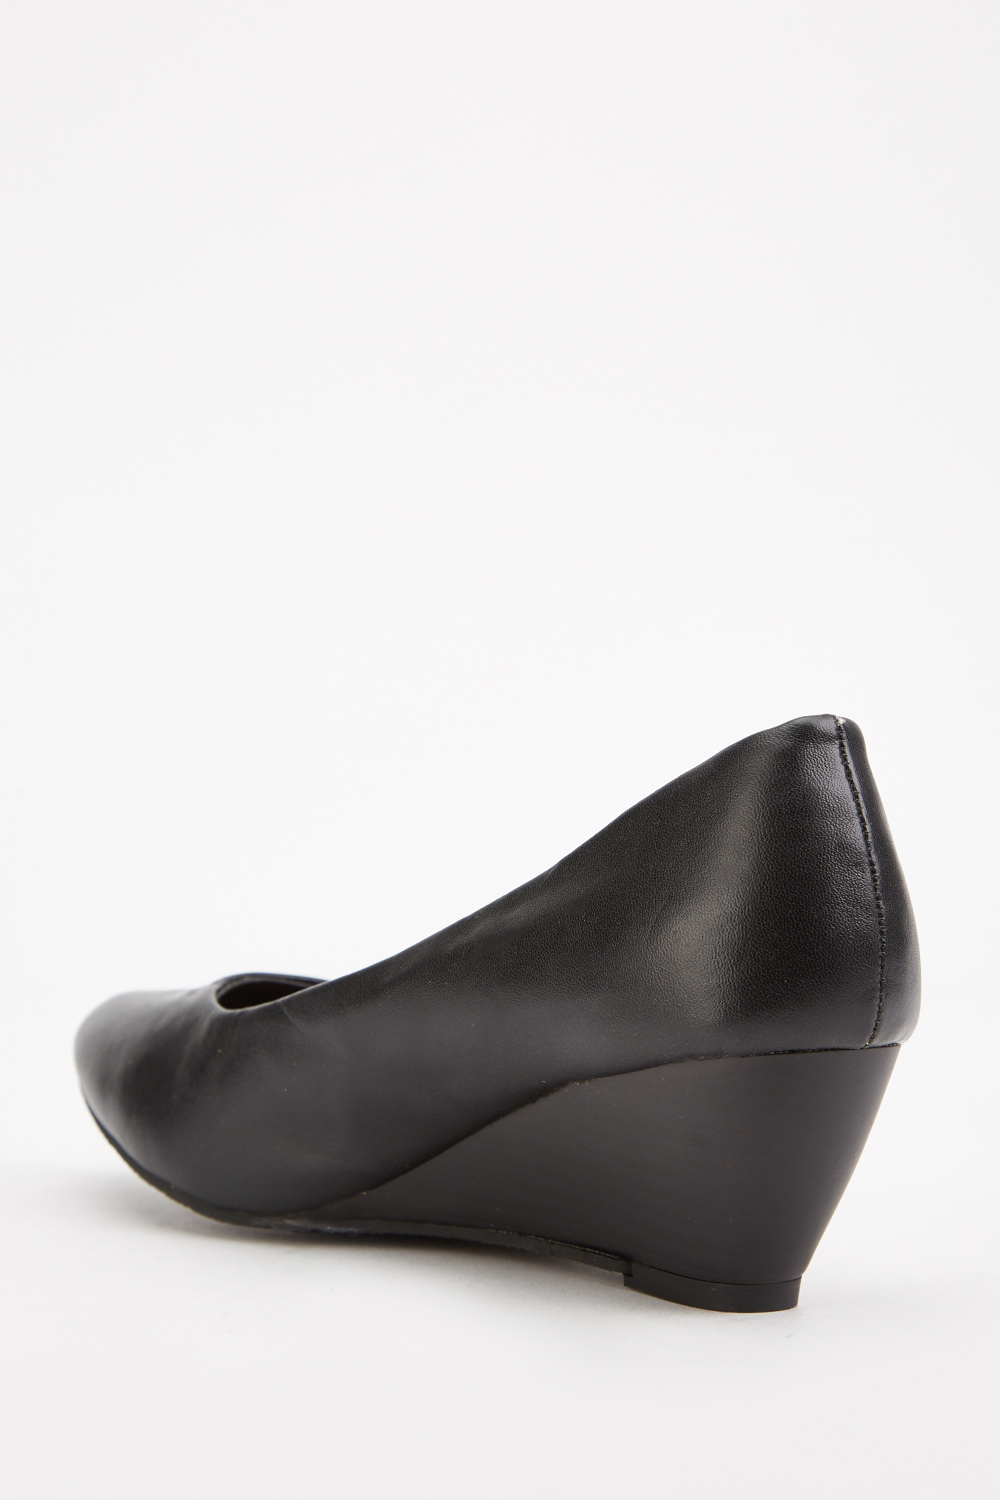 black wedge shoes